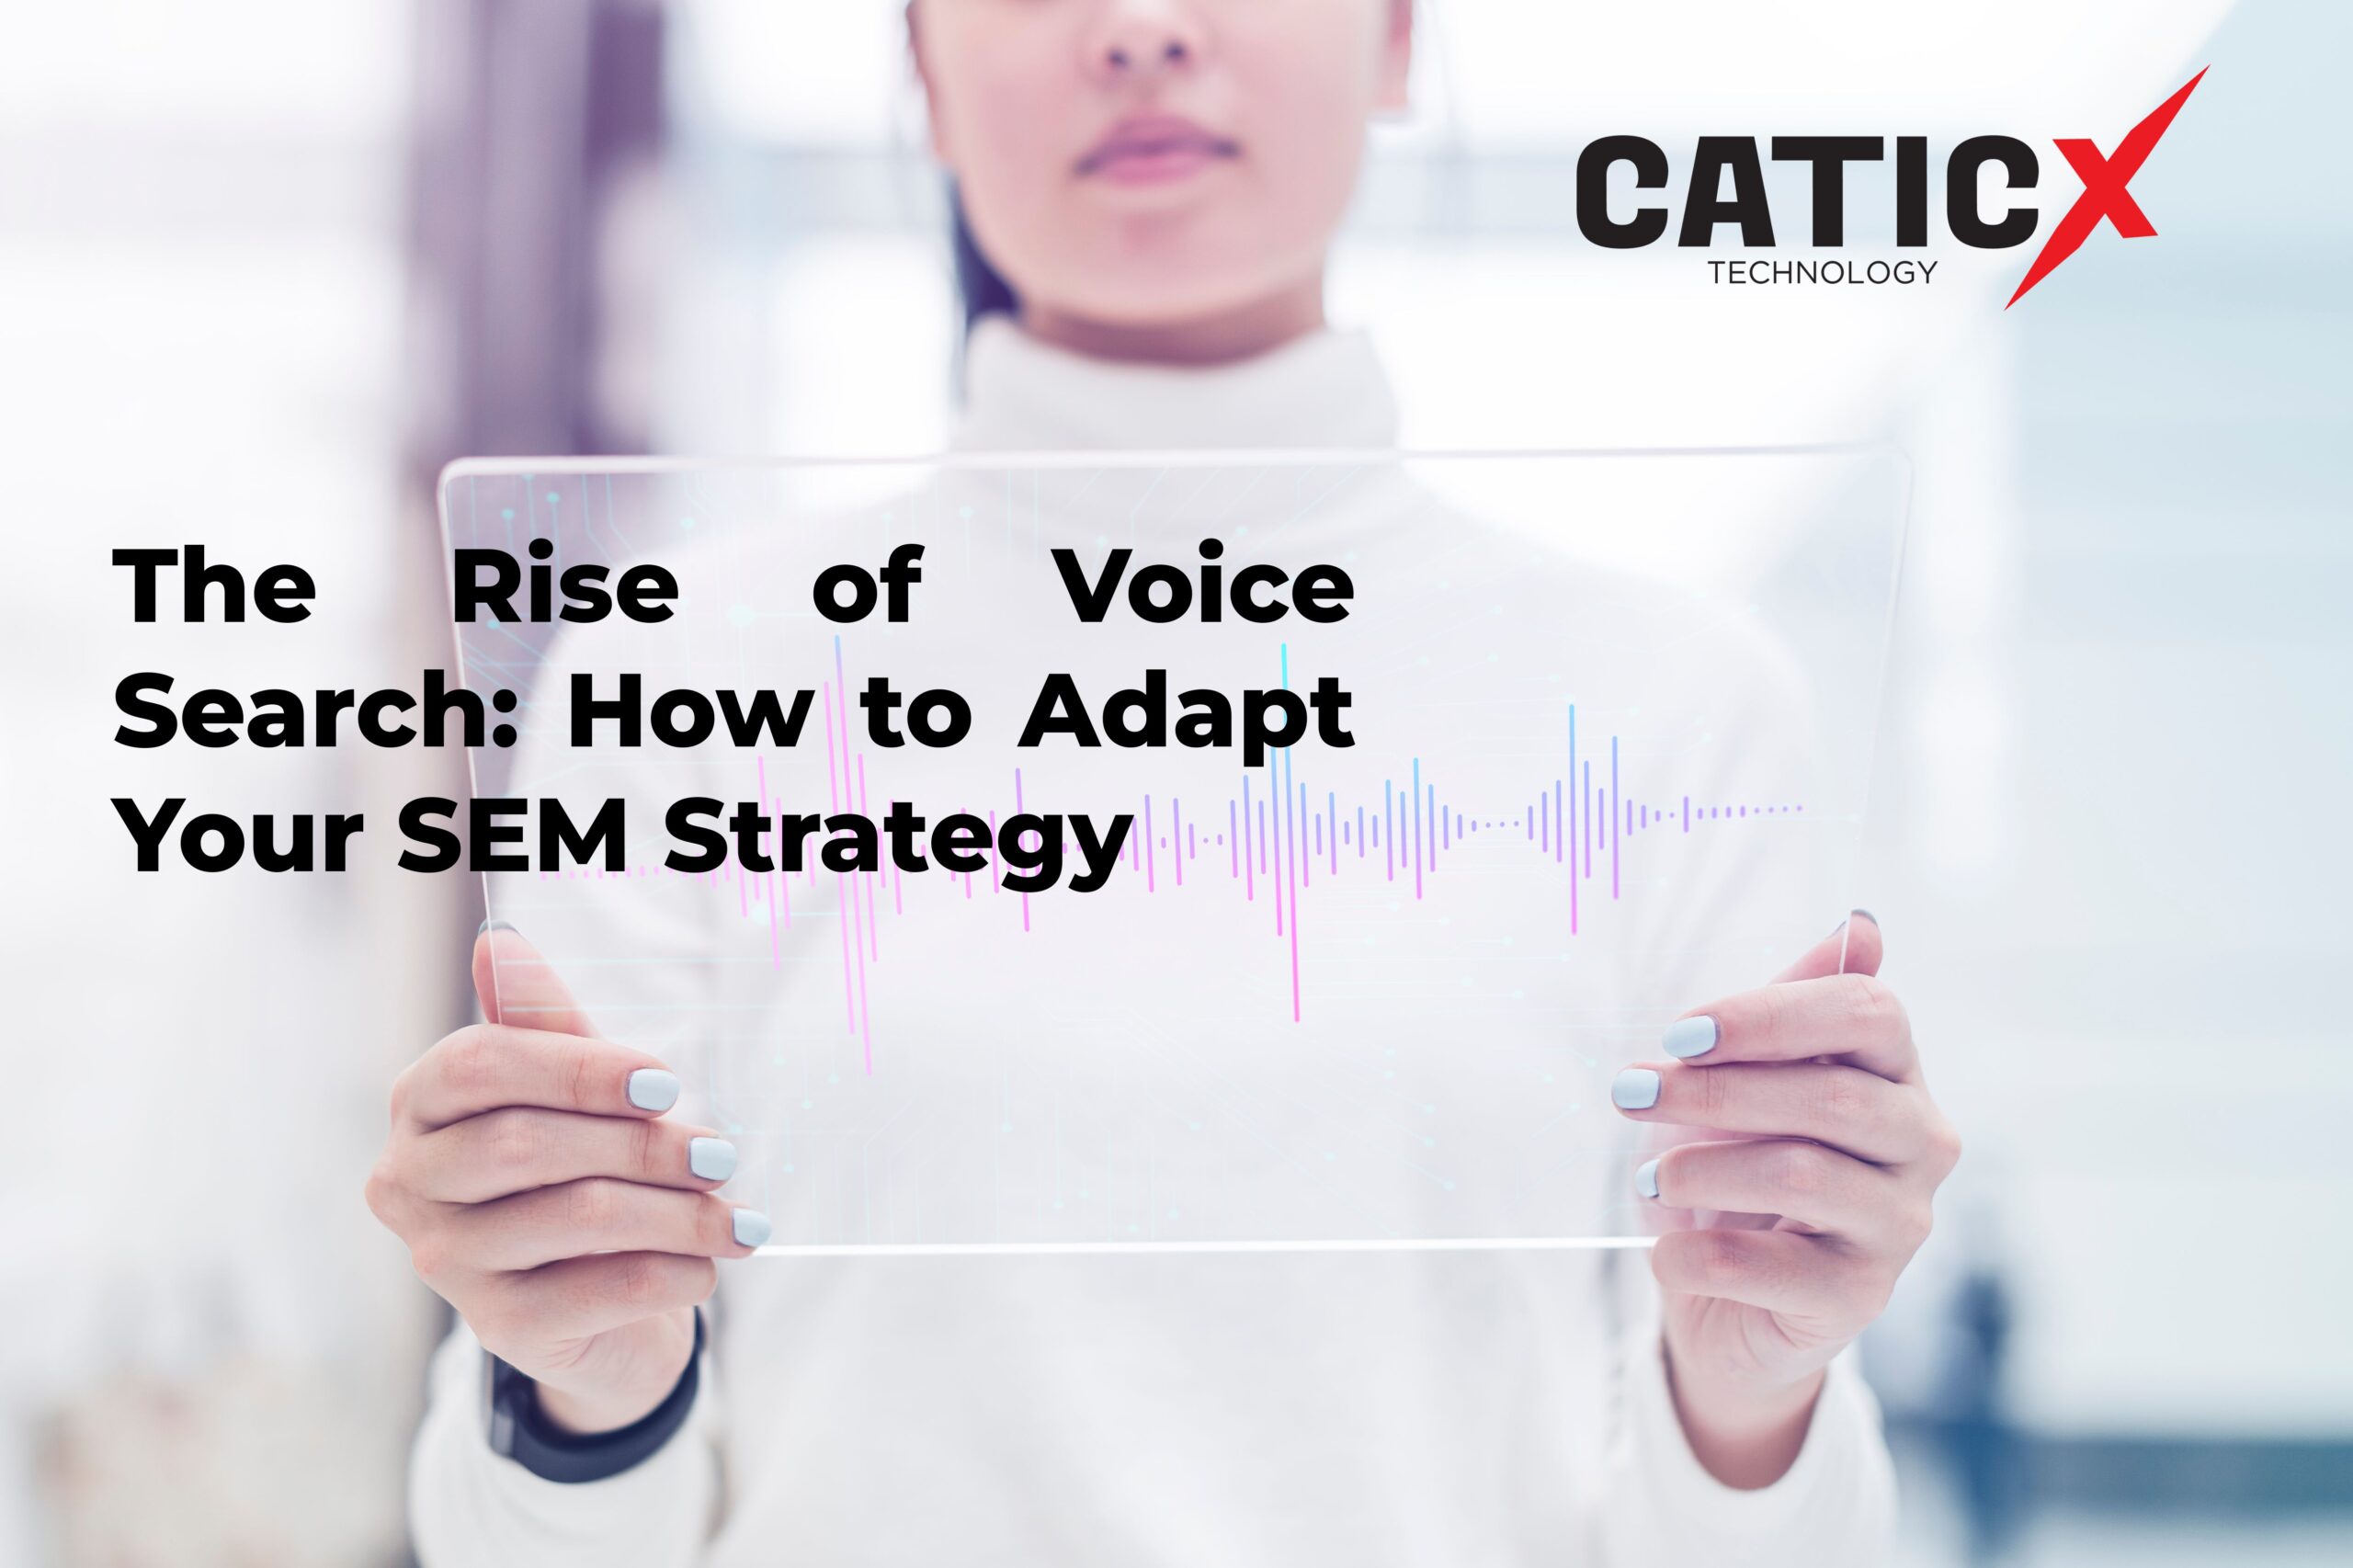 The Rise of Voice Search: How to Adapt Your SEM Strategy